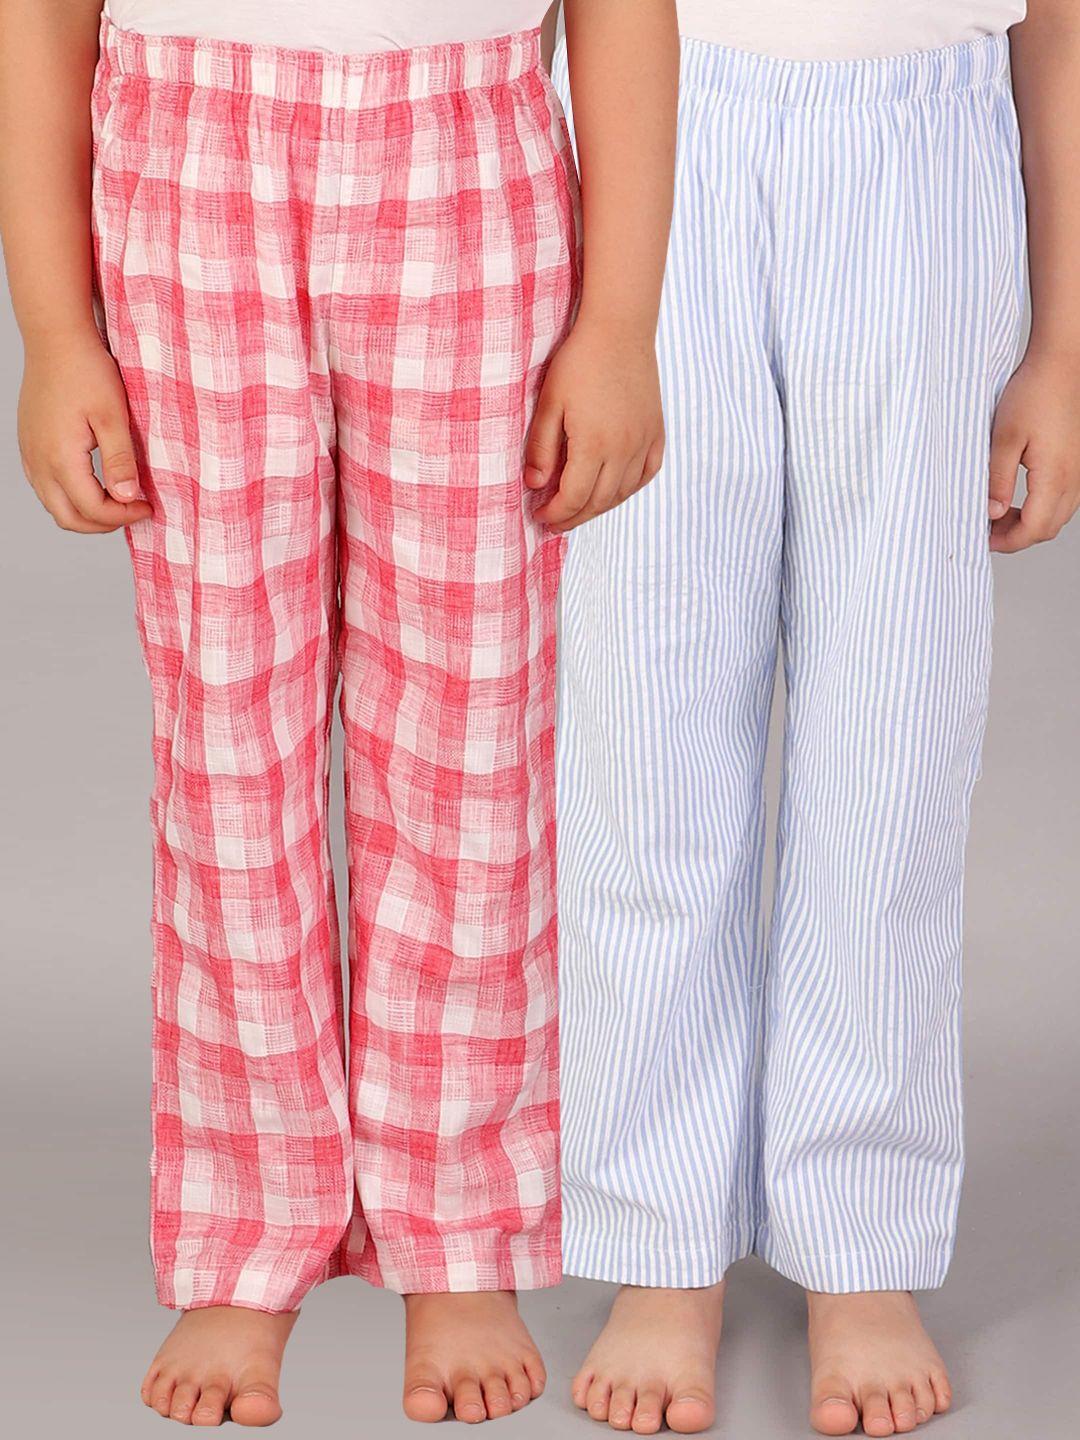 bstories boys pack of 2 red & blue checked pure cotton lounge pants